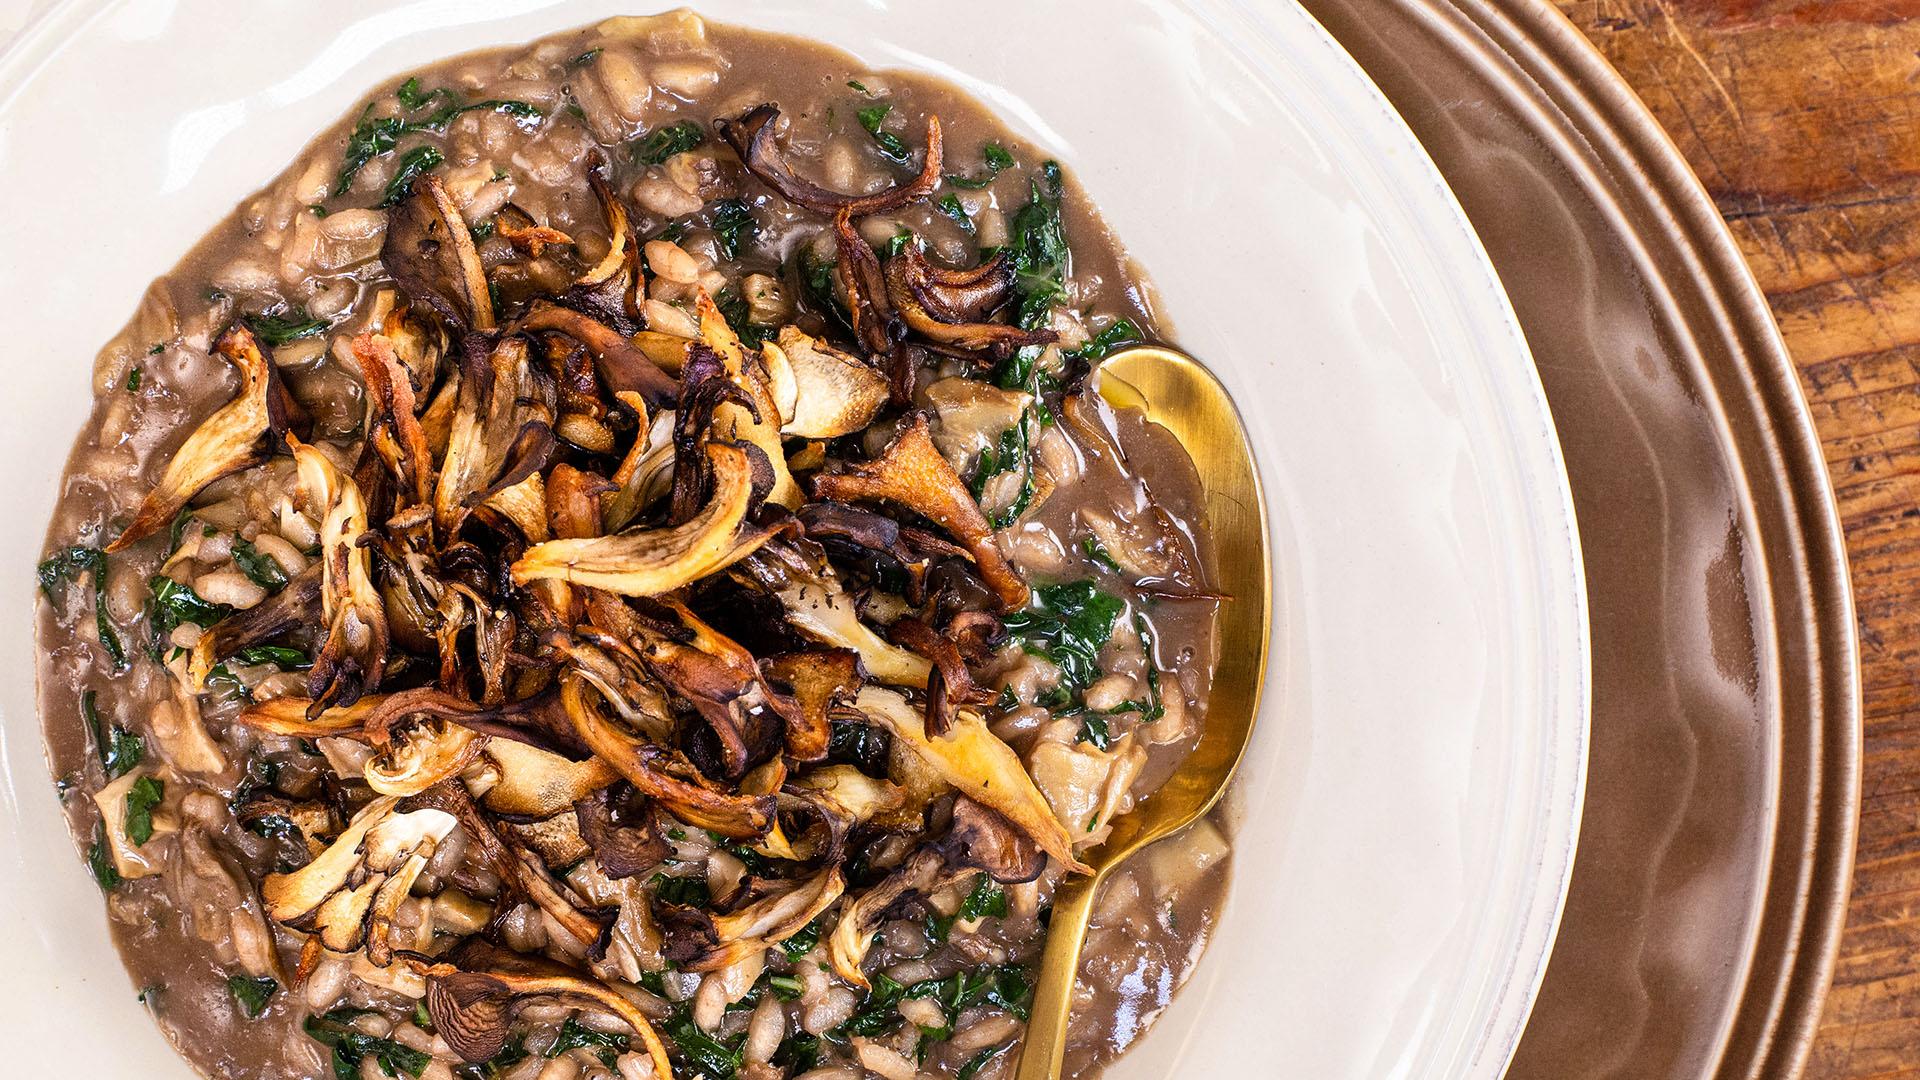 Rachael's Risotto with Kale & Mushrooms | Recipe - Rachael